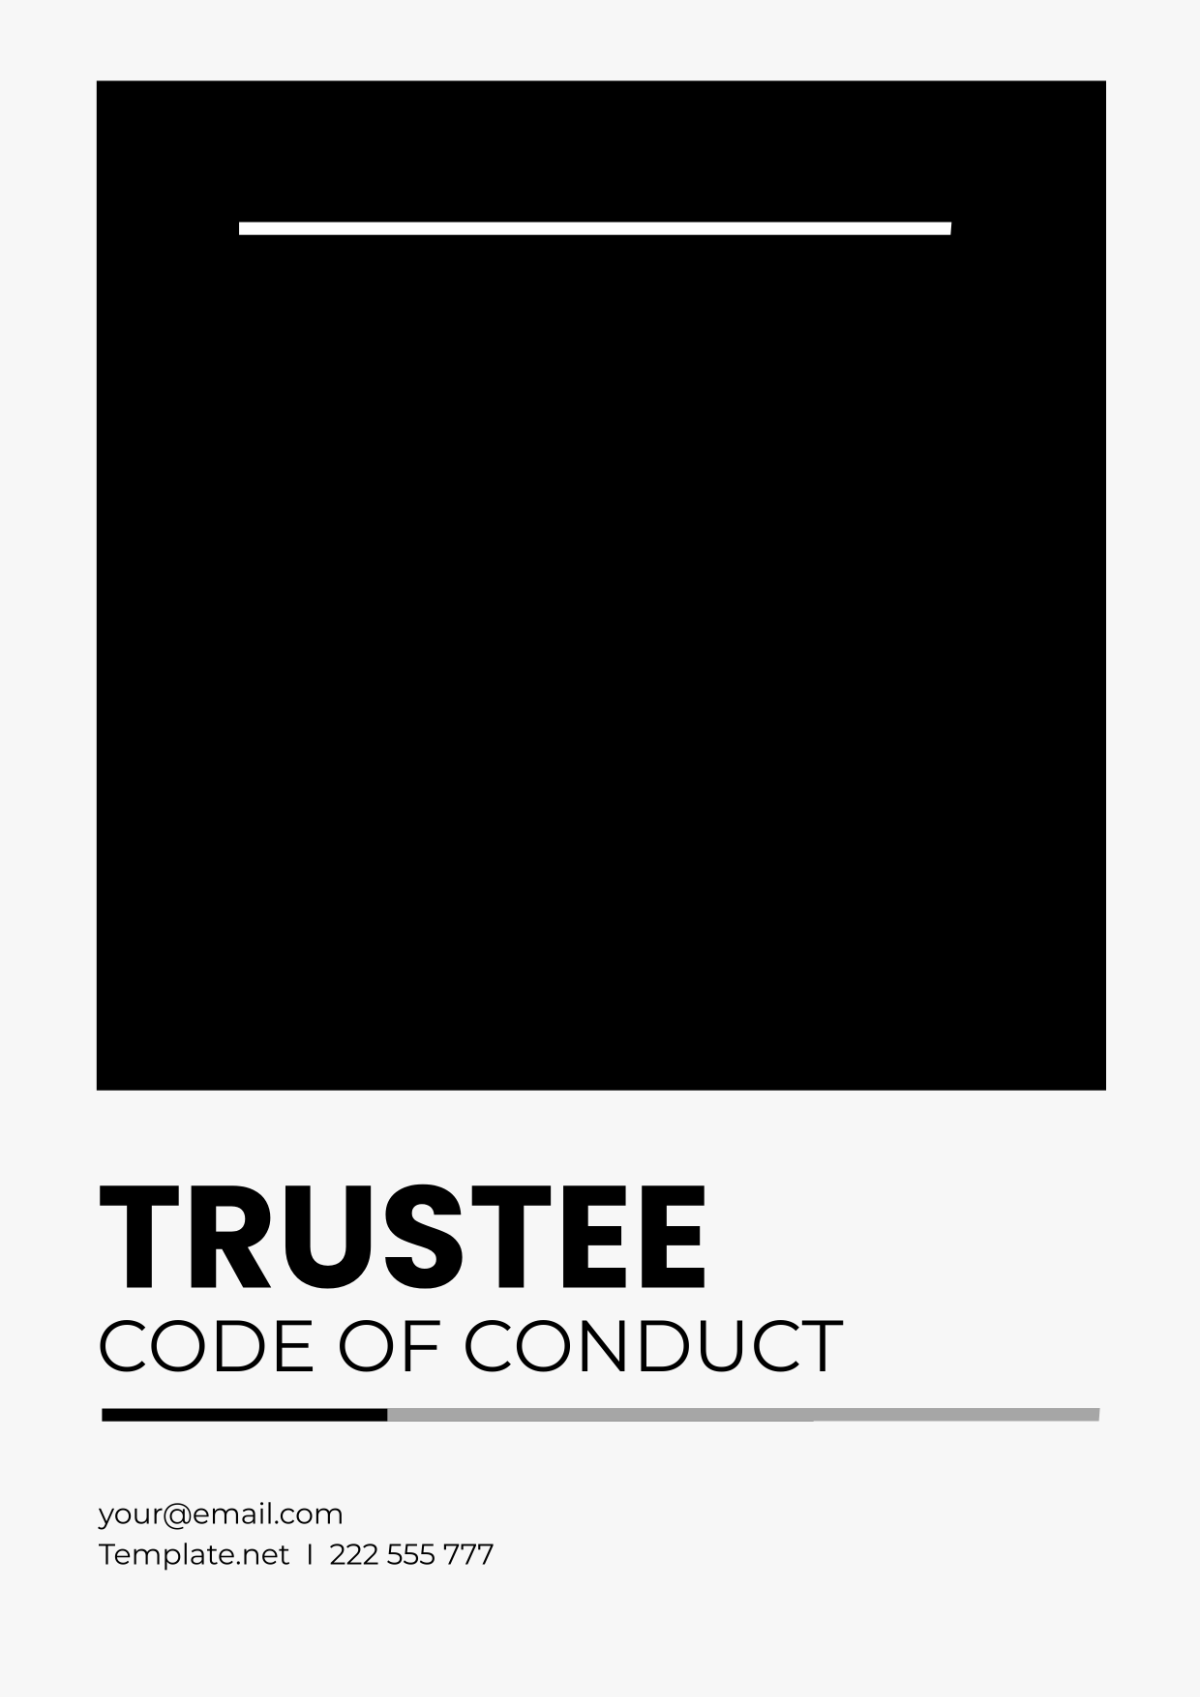 Trustee Code of Conduct Template